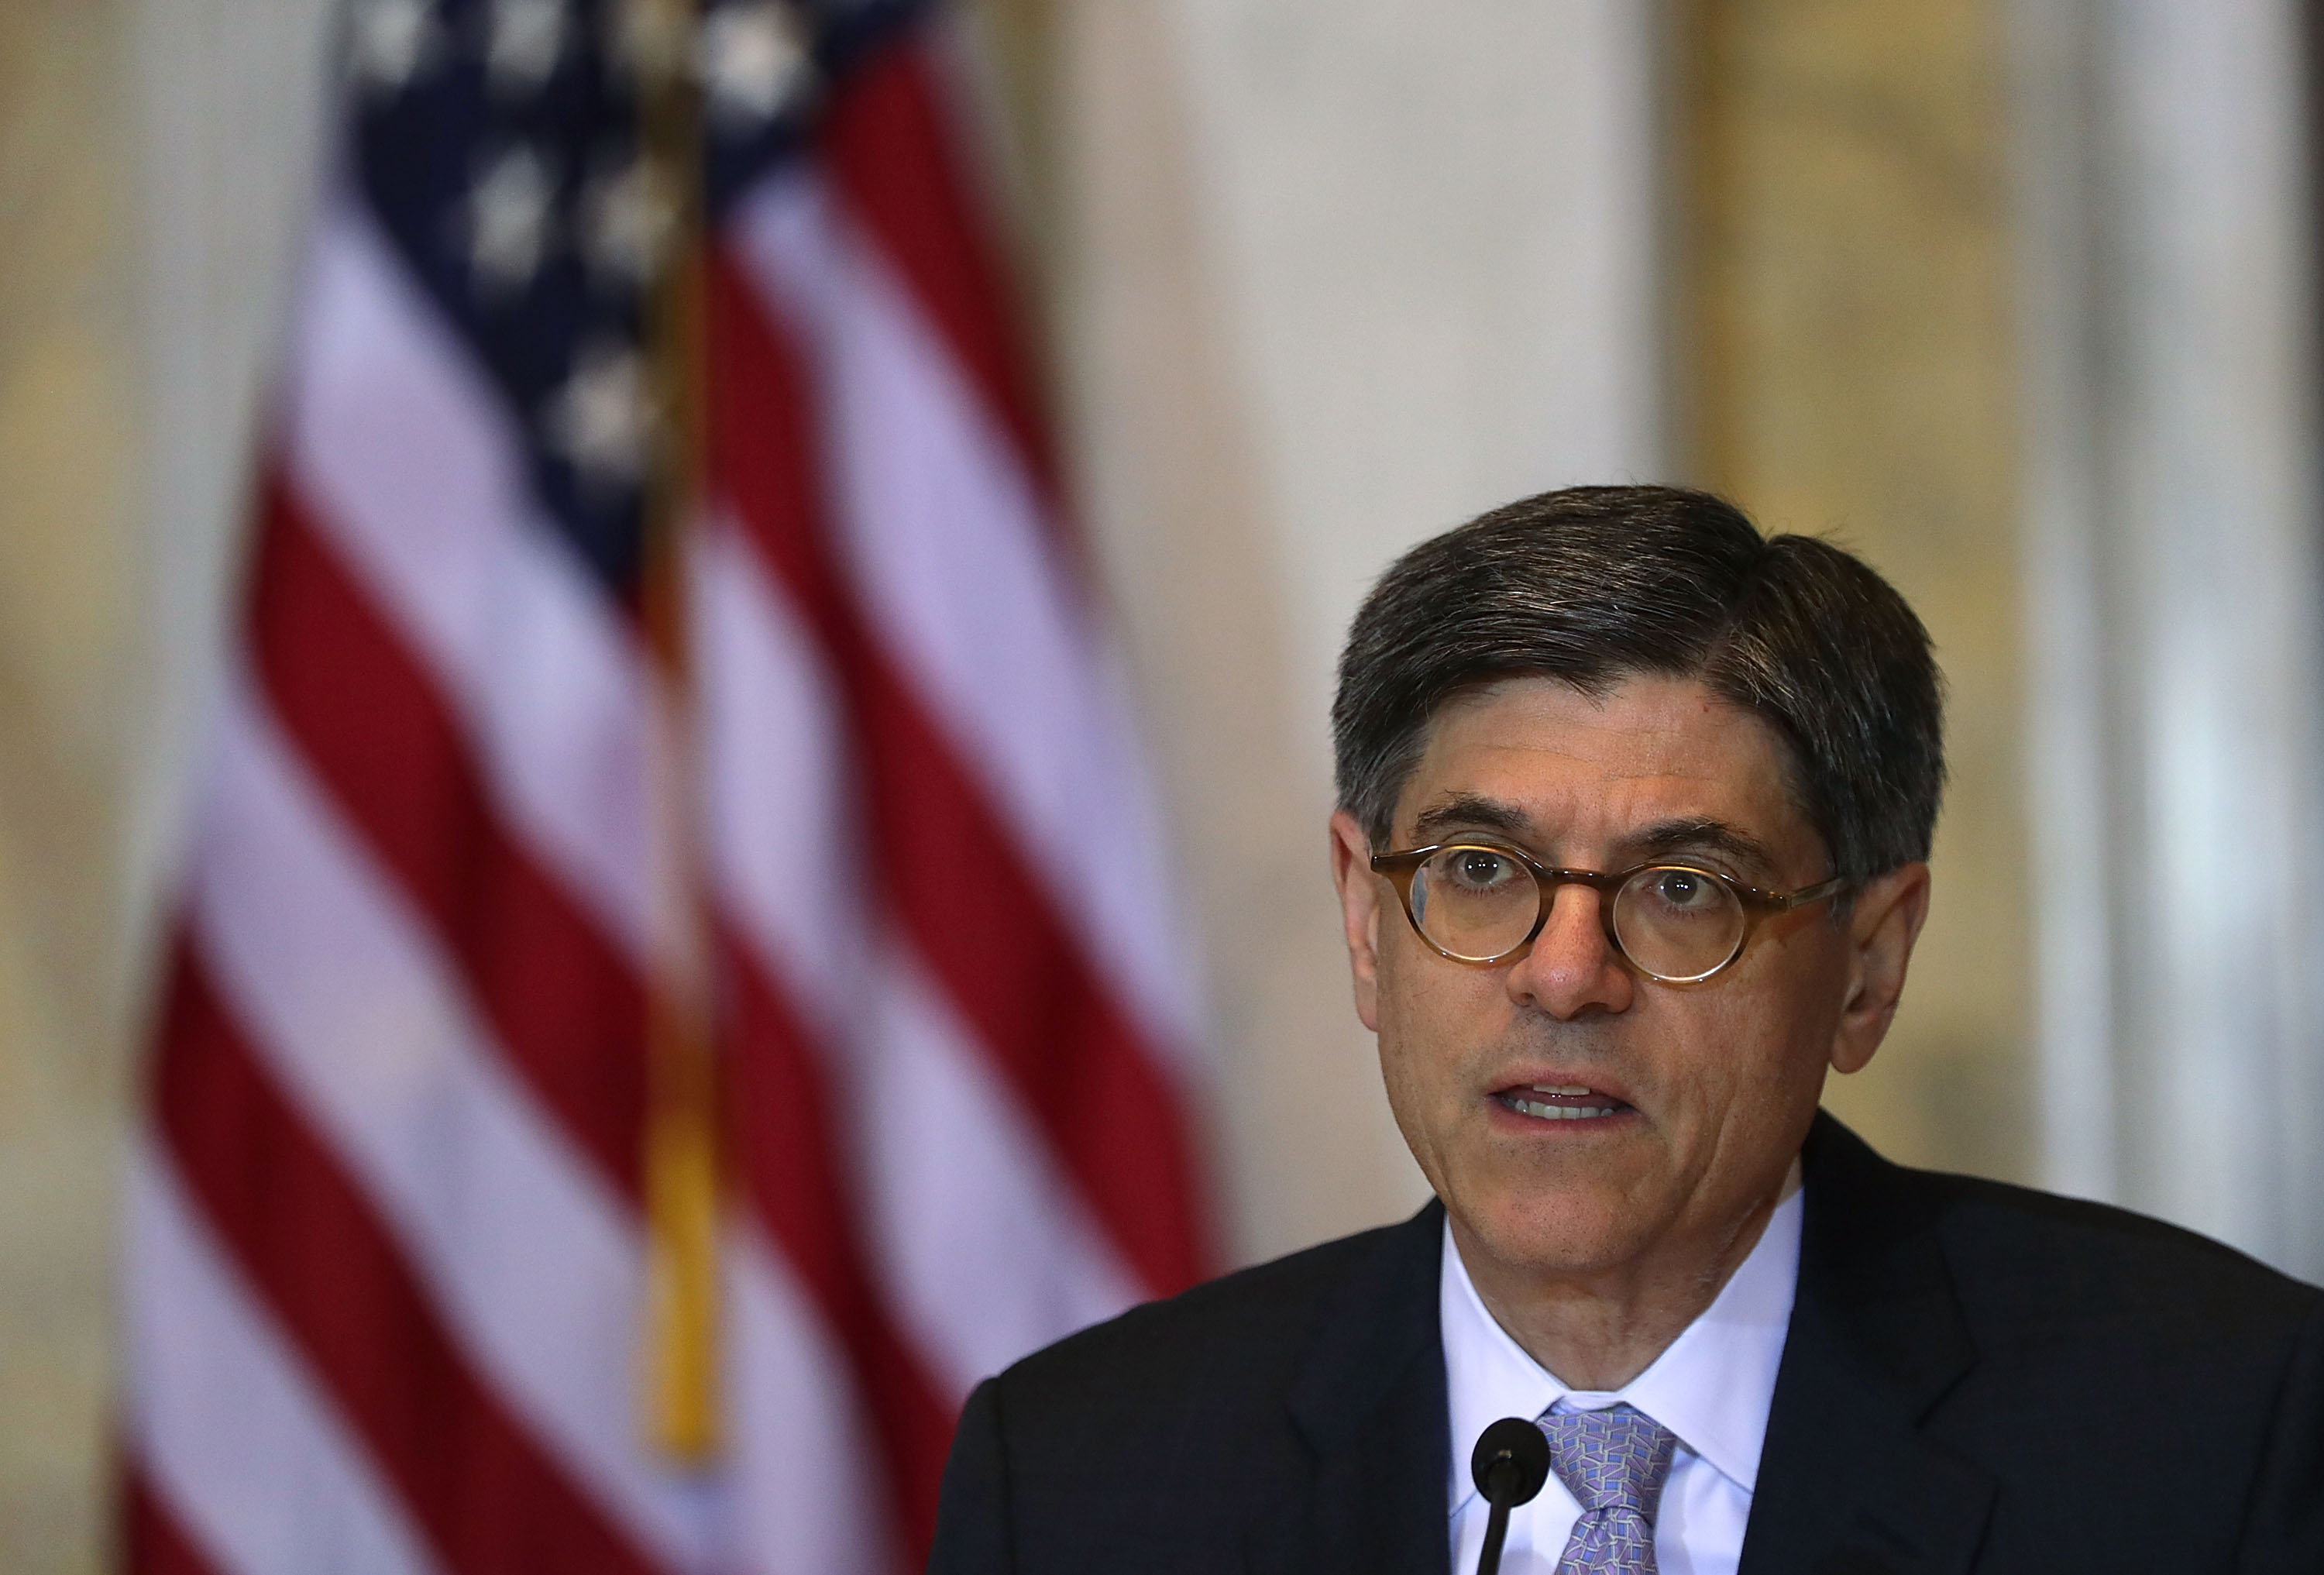 U.S. Secretary of the Treasury Jacob Lew speaks during a meeting of the Financial Stability Oversight Council June 21, 2016 in Washington, DC. The council held a meeting on its "2016 annual report, with an agenda that includes: an update on market developments; discussion of the Board of Governors of the Federal Reserve System's proposed rulemaking that would apply to certain insurance companies; and a discussion of the annual re-evaluation of the designation of a nonbank financial company."   Alex Wong&mdash;Getty Images (Alex Wong&mdash;Getty Images)